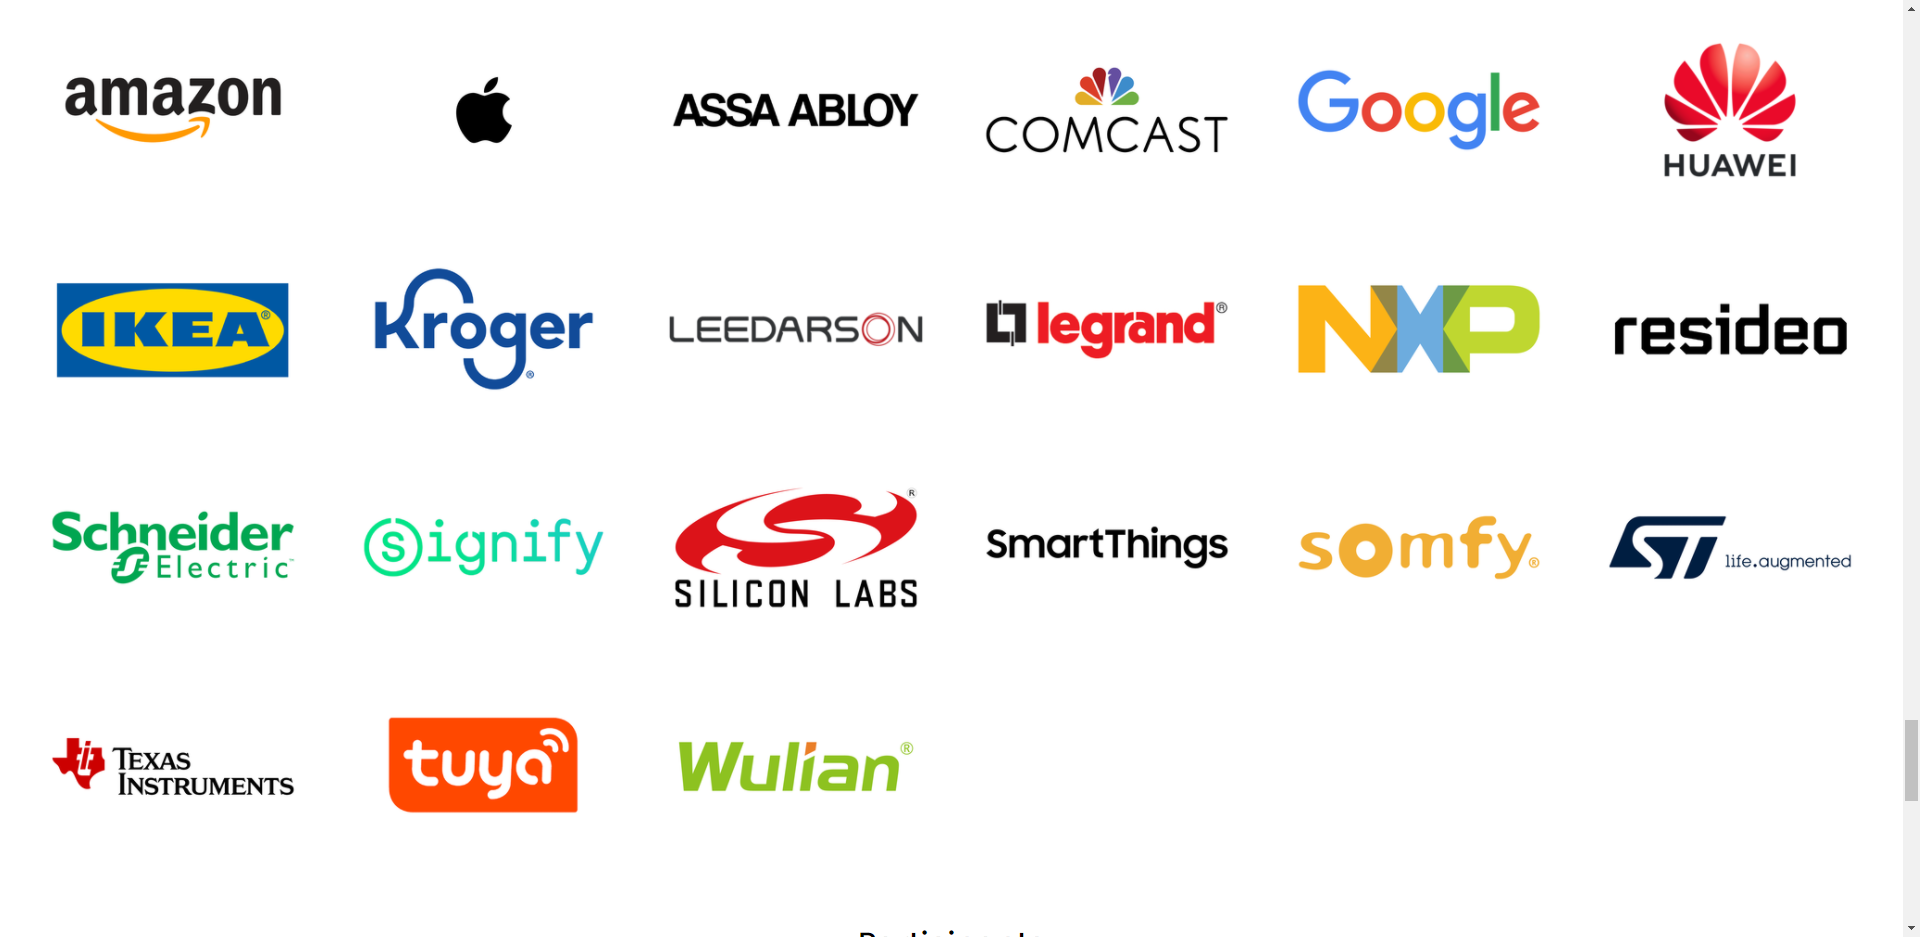 Screenshot of Project CHIP Company members including IKEA, Silicon Labs, Google, Texas Instruments